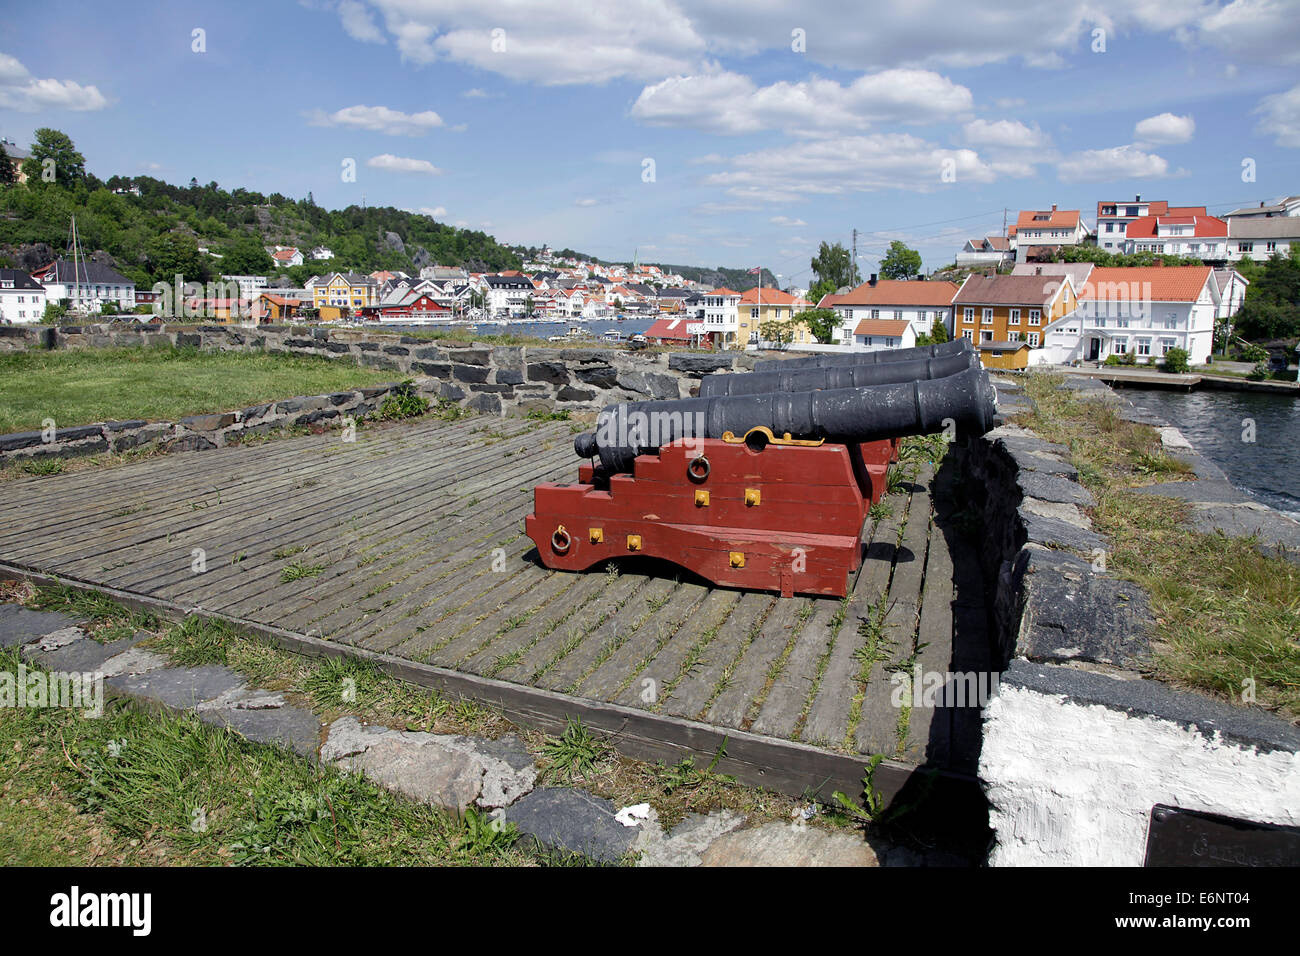 Narrow alleys and picturesque colorful wooden houses characterize Kragerø that spread over three islands on the south coast of Norway on Skaggerak. Photo: Klaus Nowottnick Date: May 30, 2014 Stock Photo